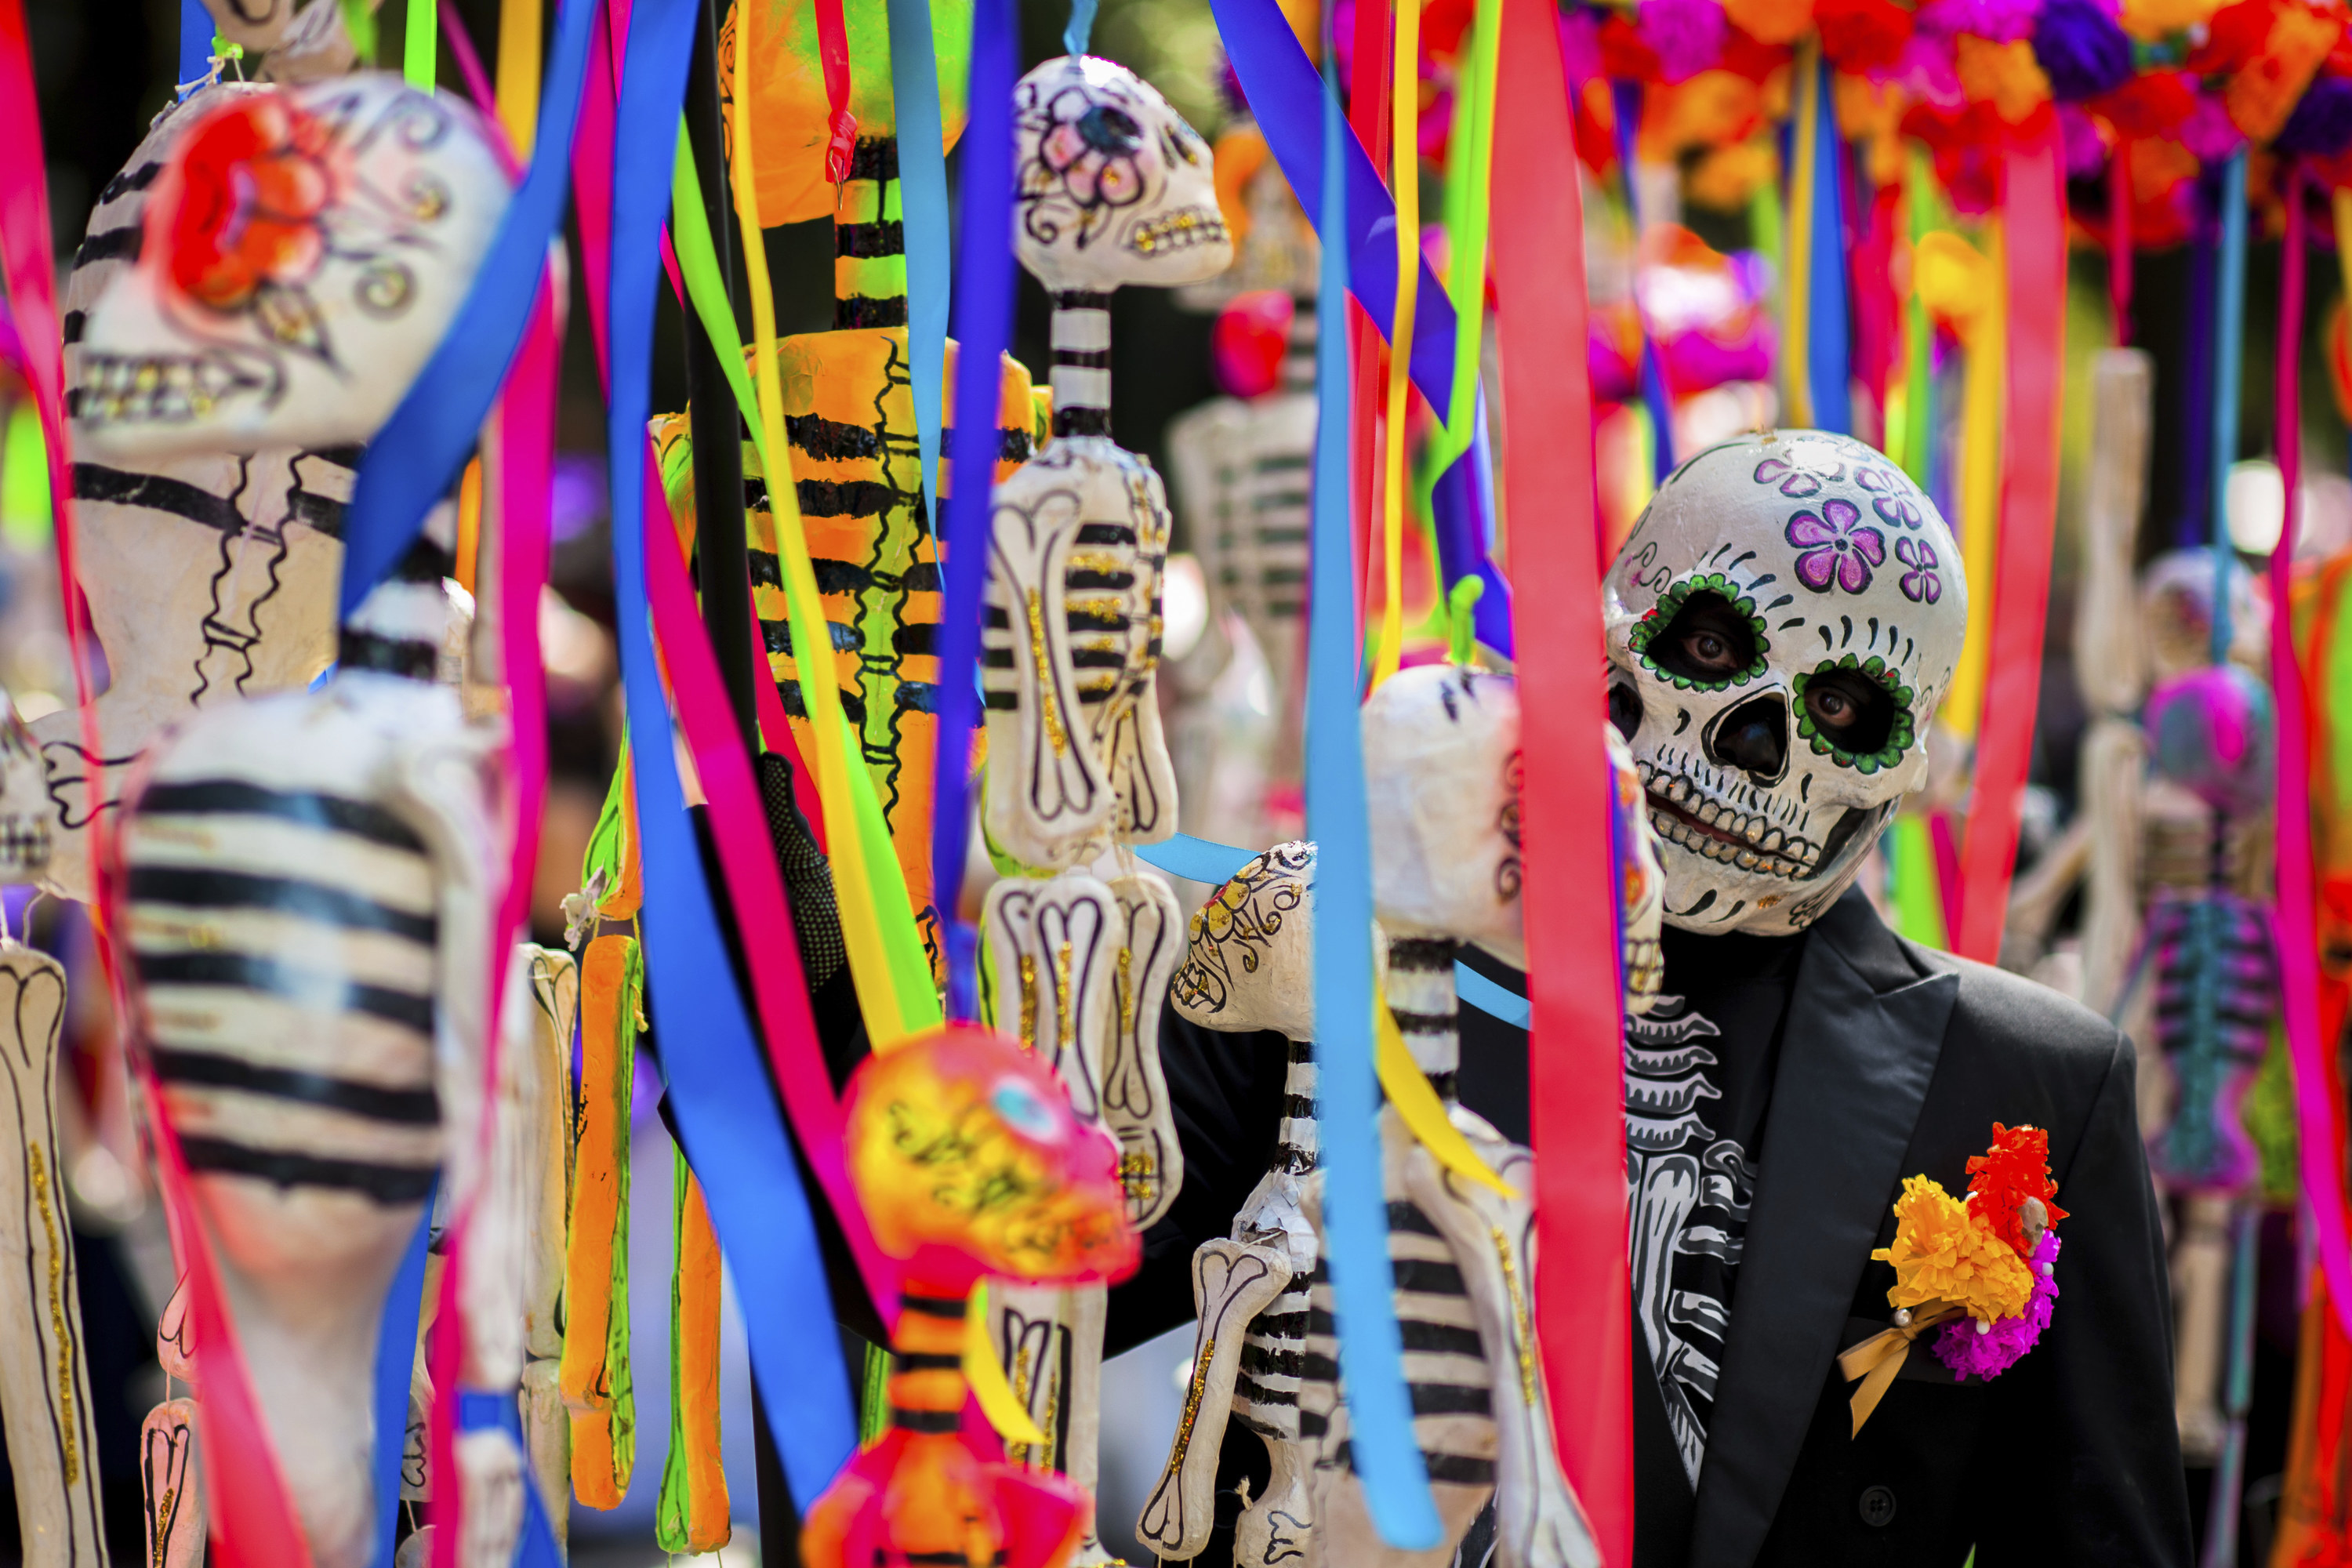 A man with a skull mask stands amid other decorations including skeletons